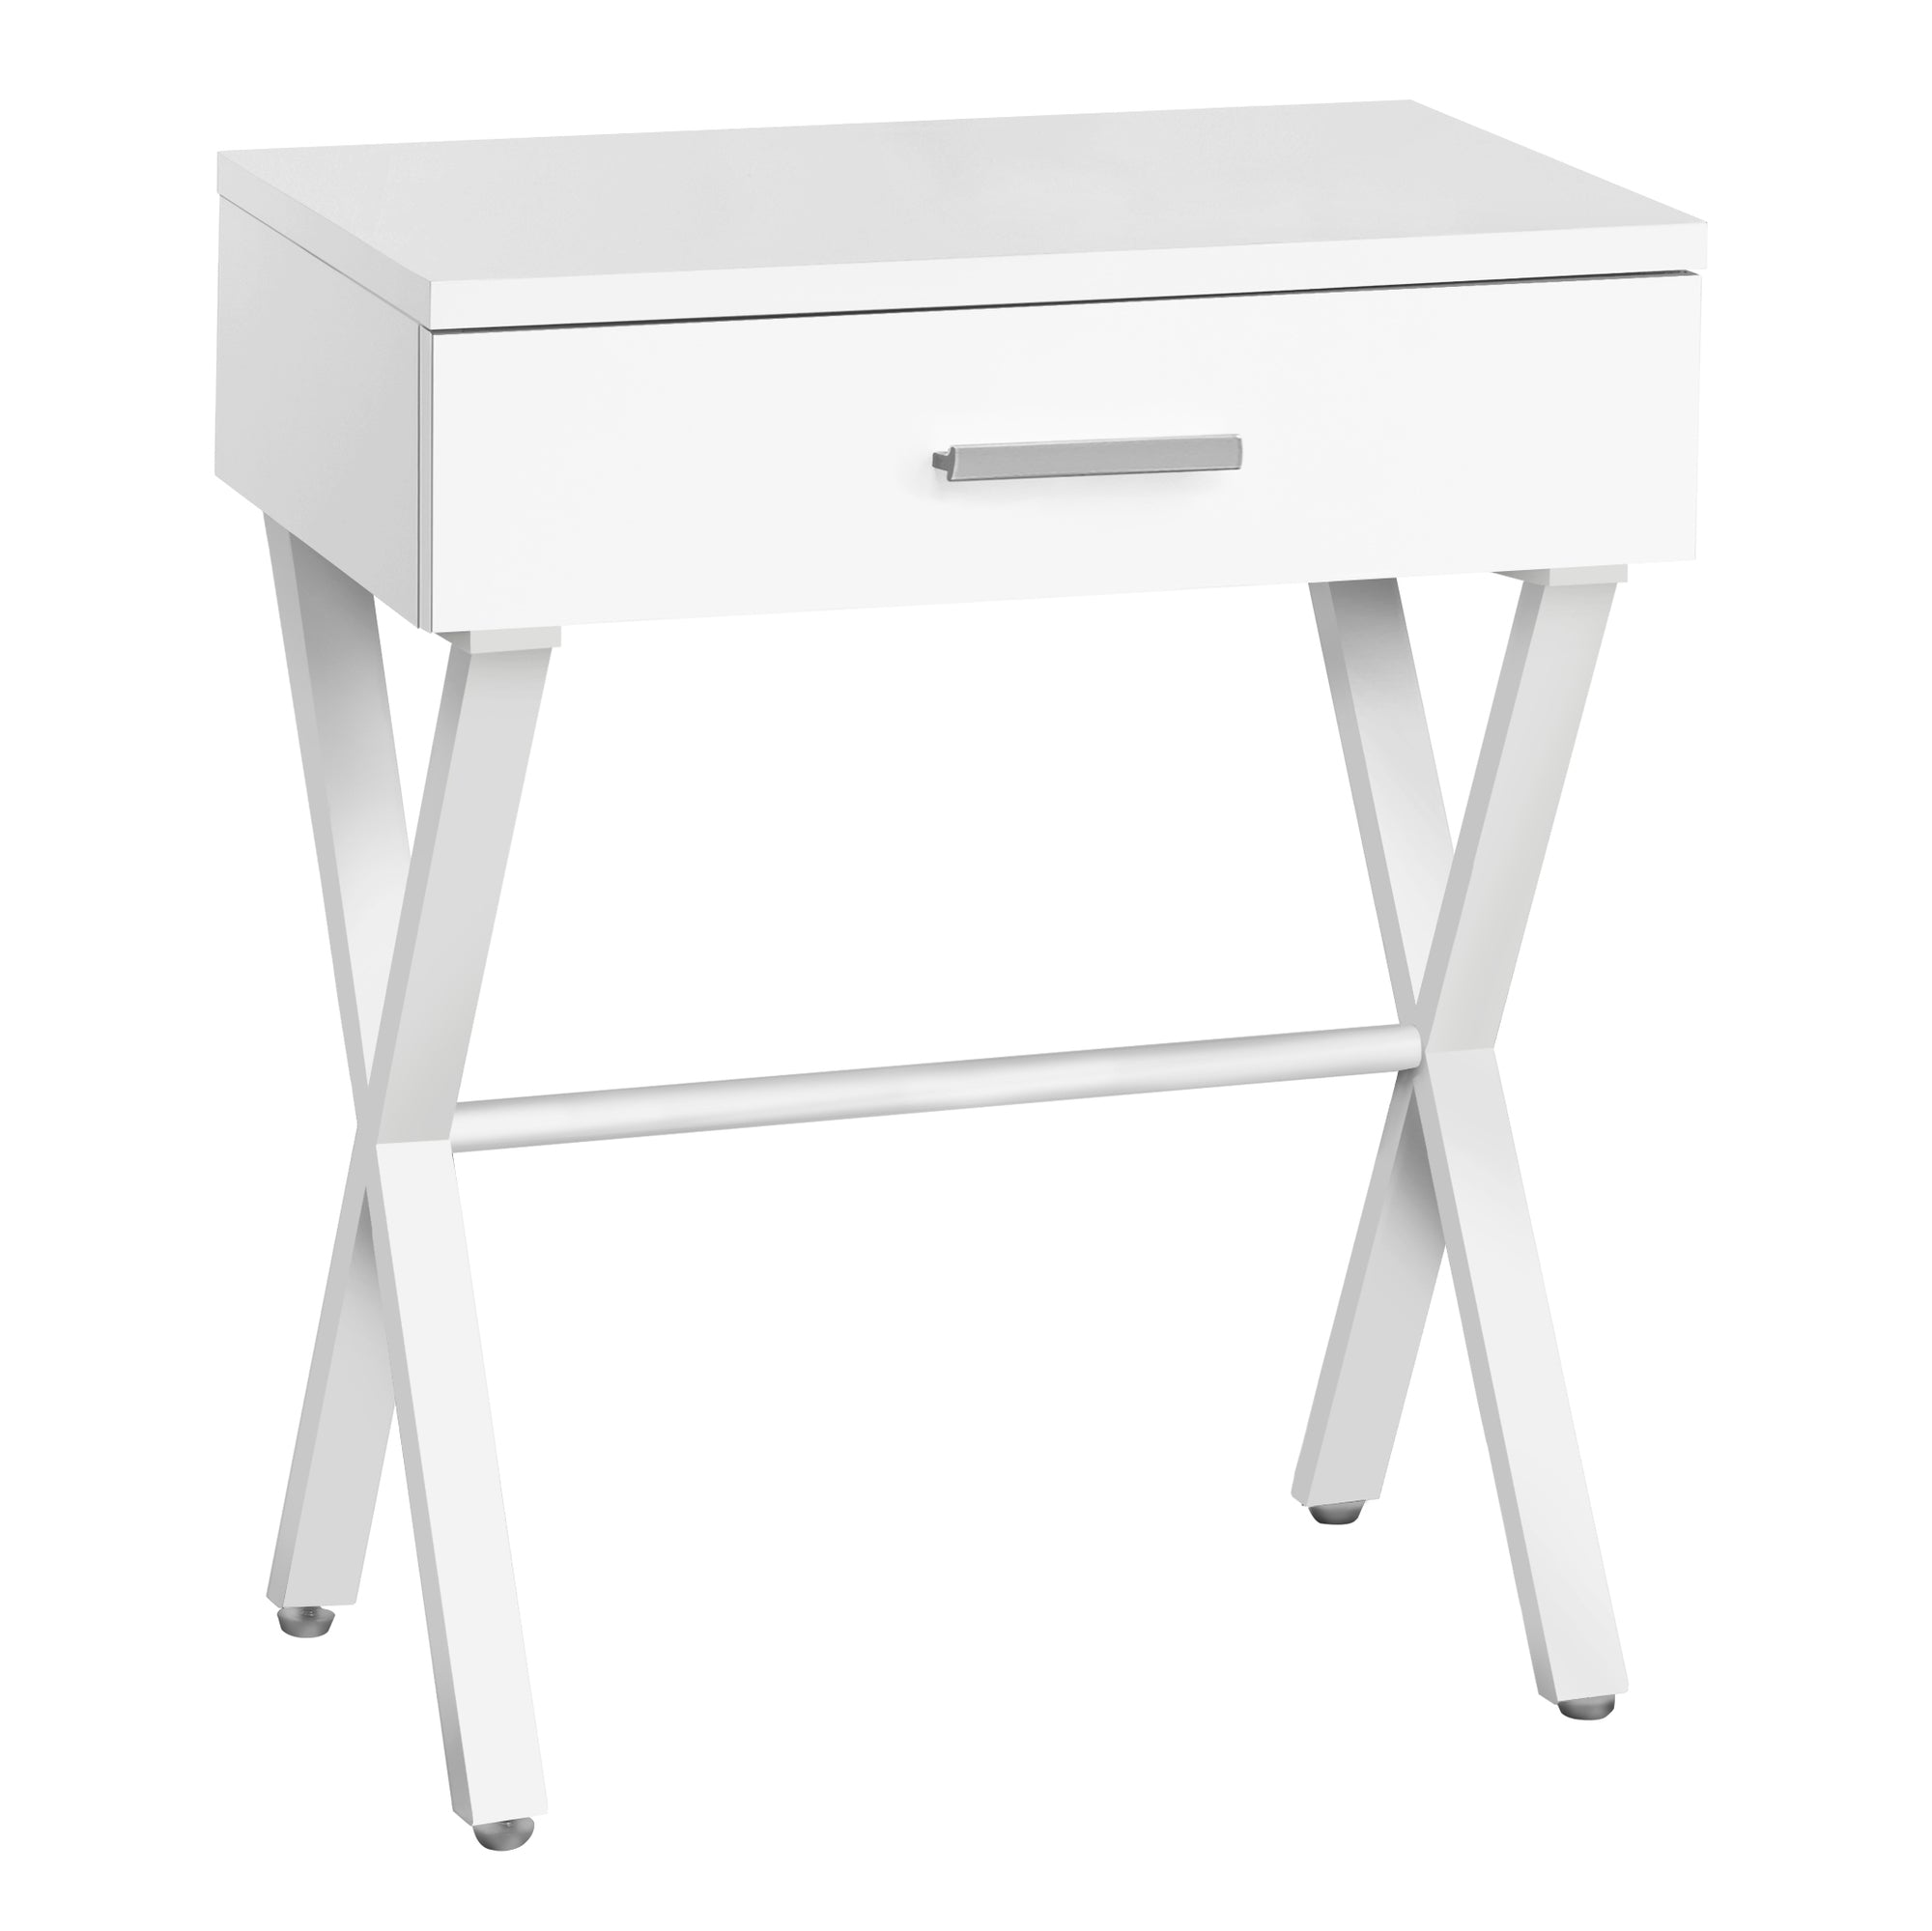 MN-643606    Accent Table, Side, End, Nightstand, Lamp, Living Room, Bedroom, Metal Legs, Laminate, White, White, Contemporary, Modern